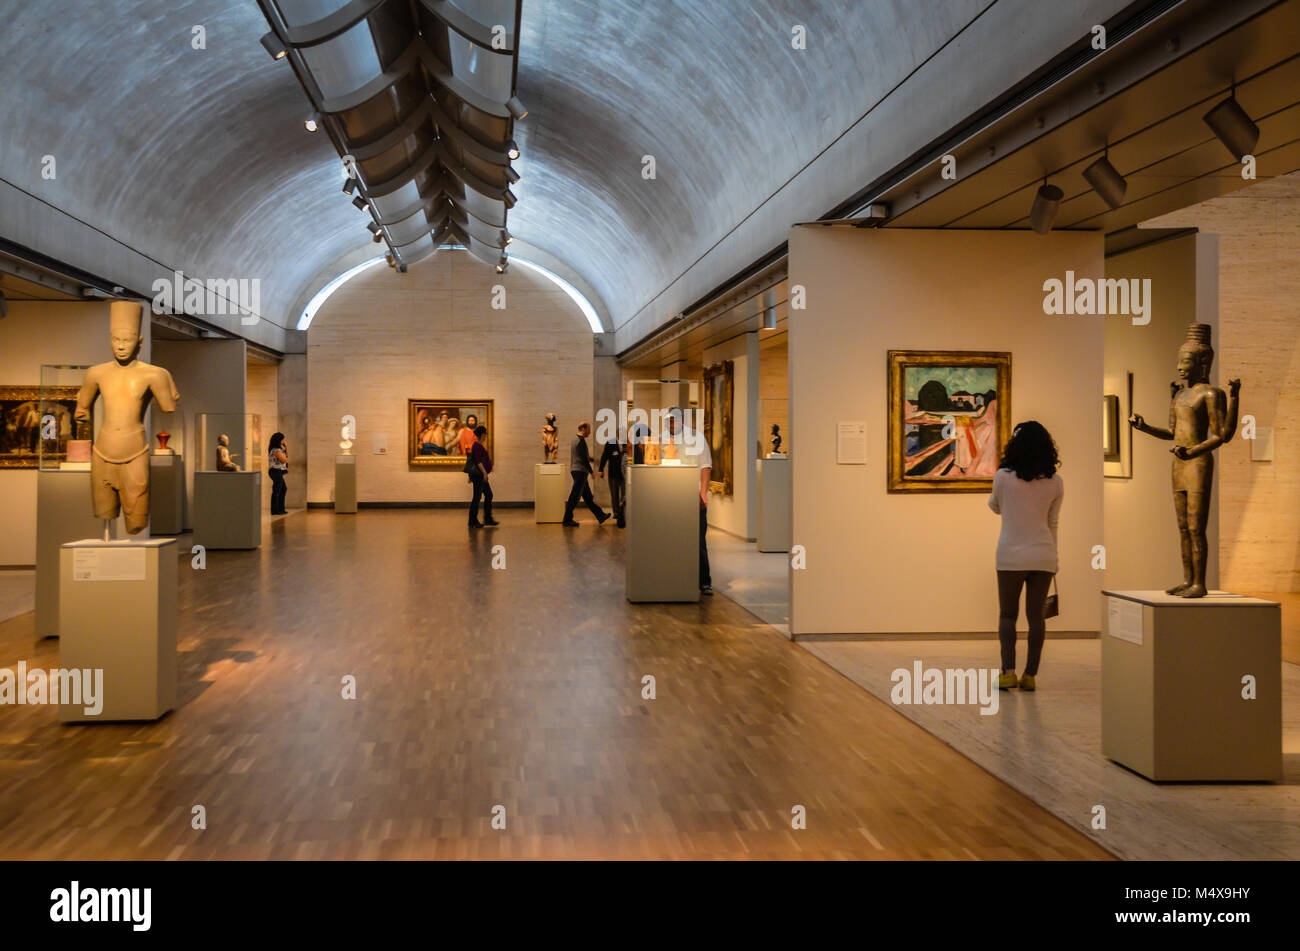 Fort Worth, Texas. Kimball Art Museum interior gallery shows collections ranging from antiquities to 20th century contemporary art. Stock Photo